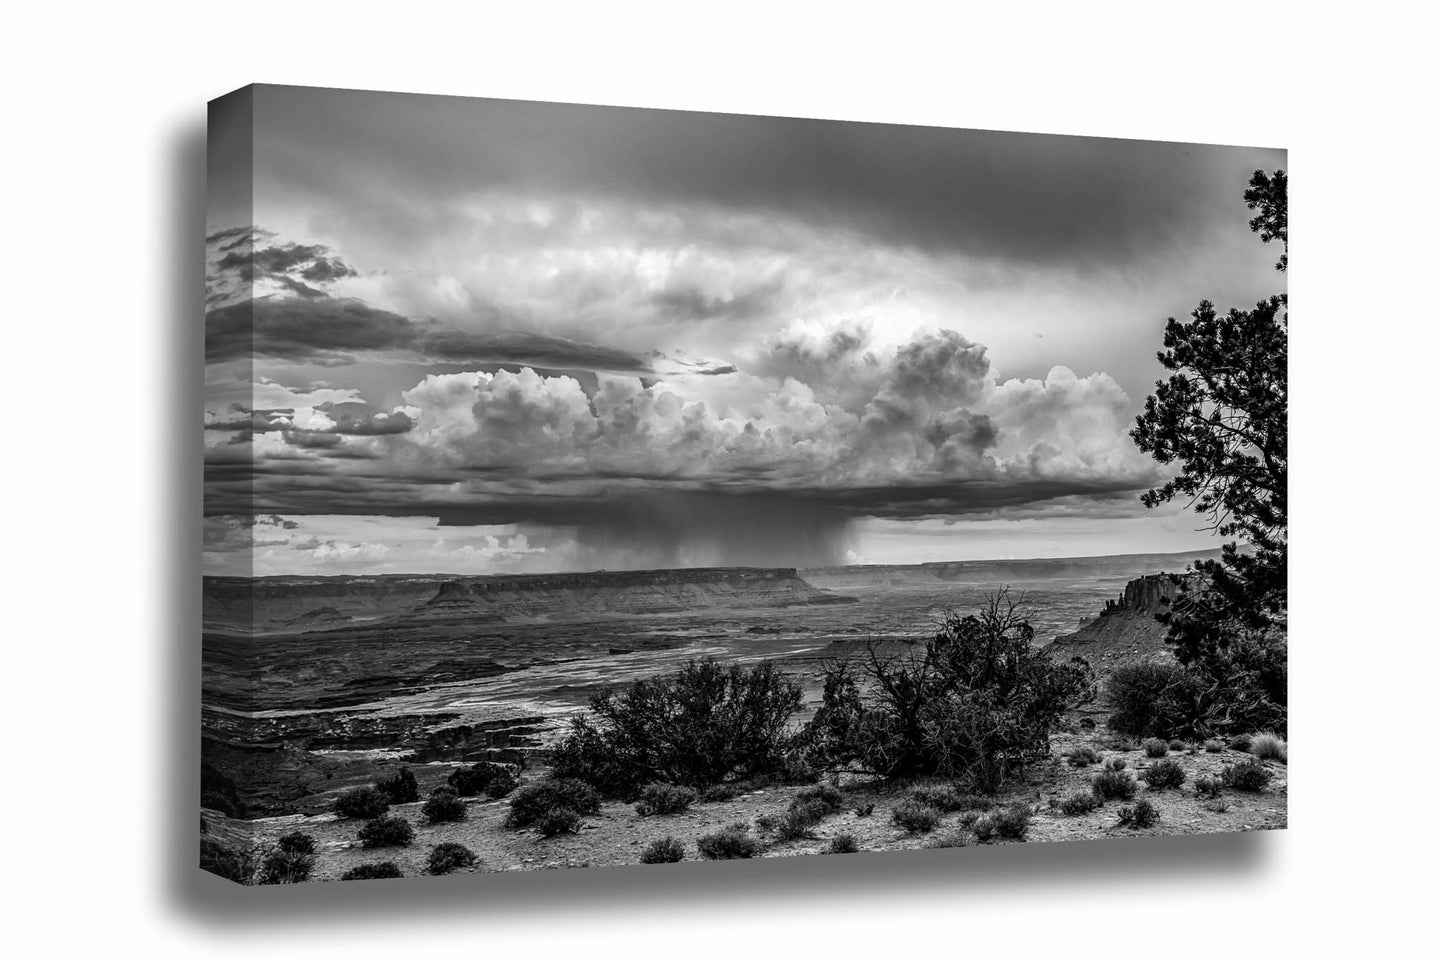 Black and white western landscape canvas wall art of a thunderstorm dropping rain over a mesa in Canyonlands National Park, Utah by Sean Ramsey of Southern Plains Photography.